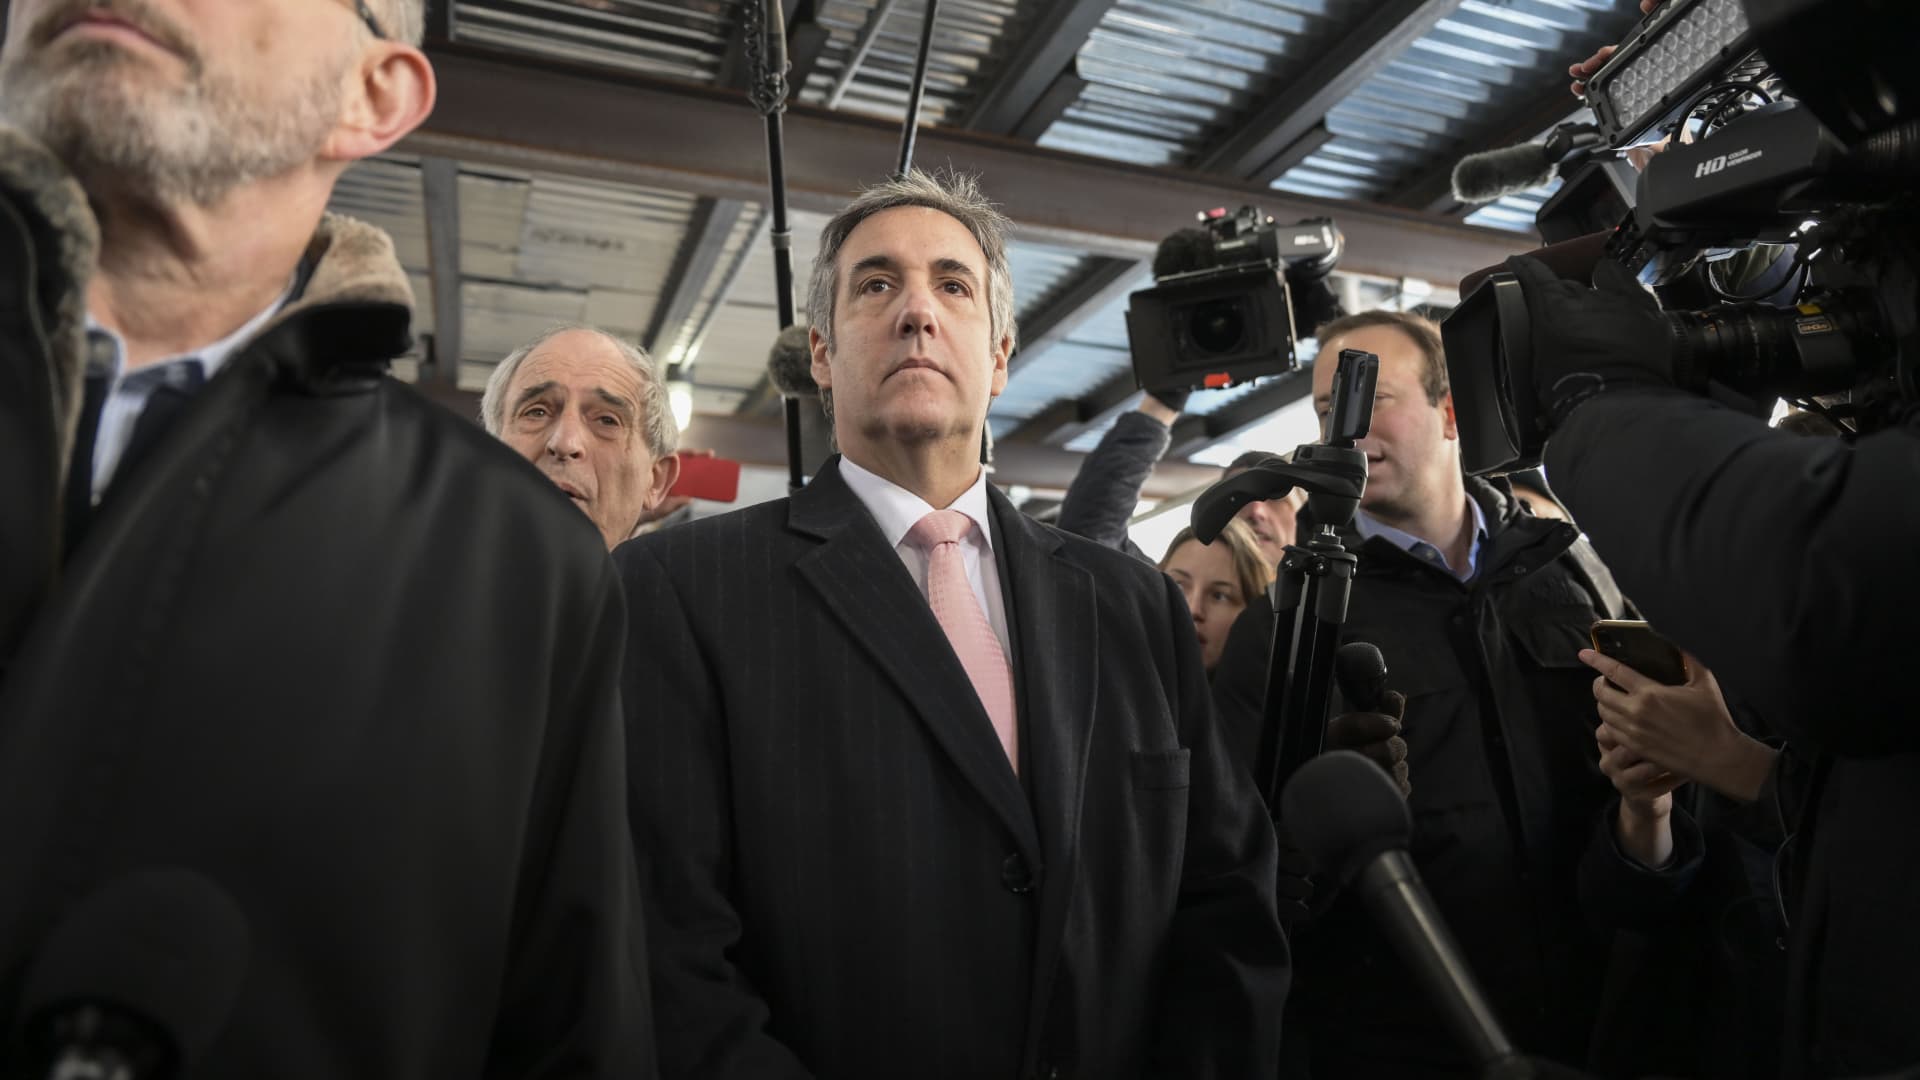 Michael Cohen (C), Donald Trump's former lawyer and fixer, walks out of a Manhattan courthouse after testifying before a grand jury, in New York, United States on March 15, 2023. 